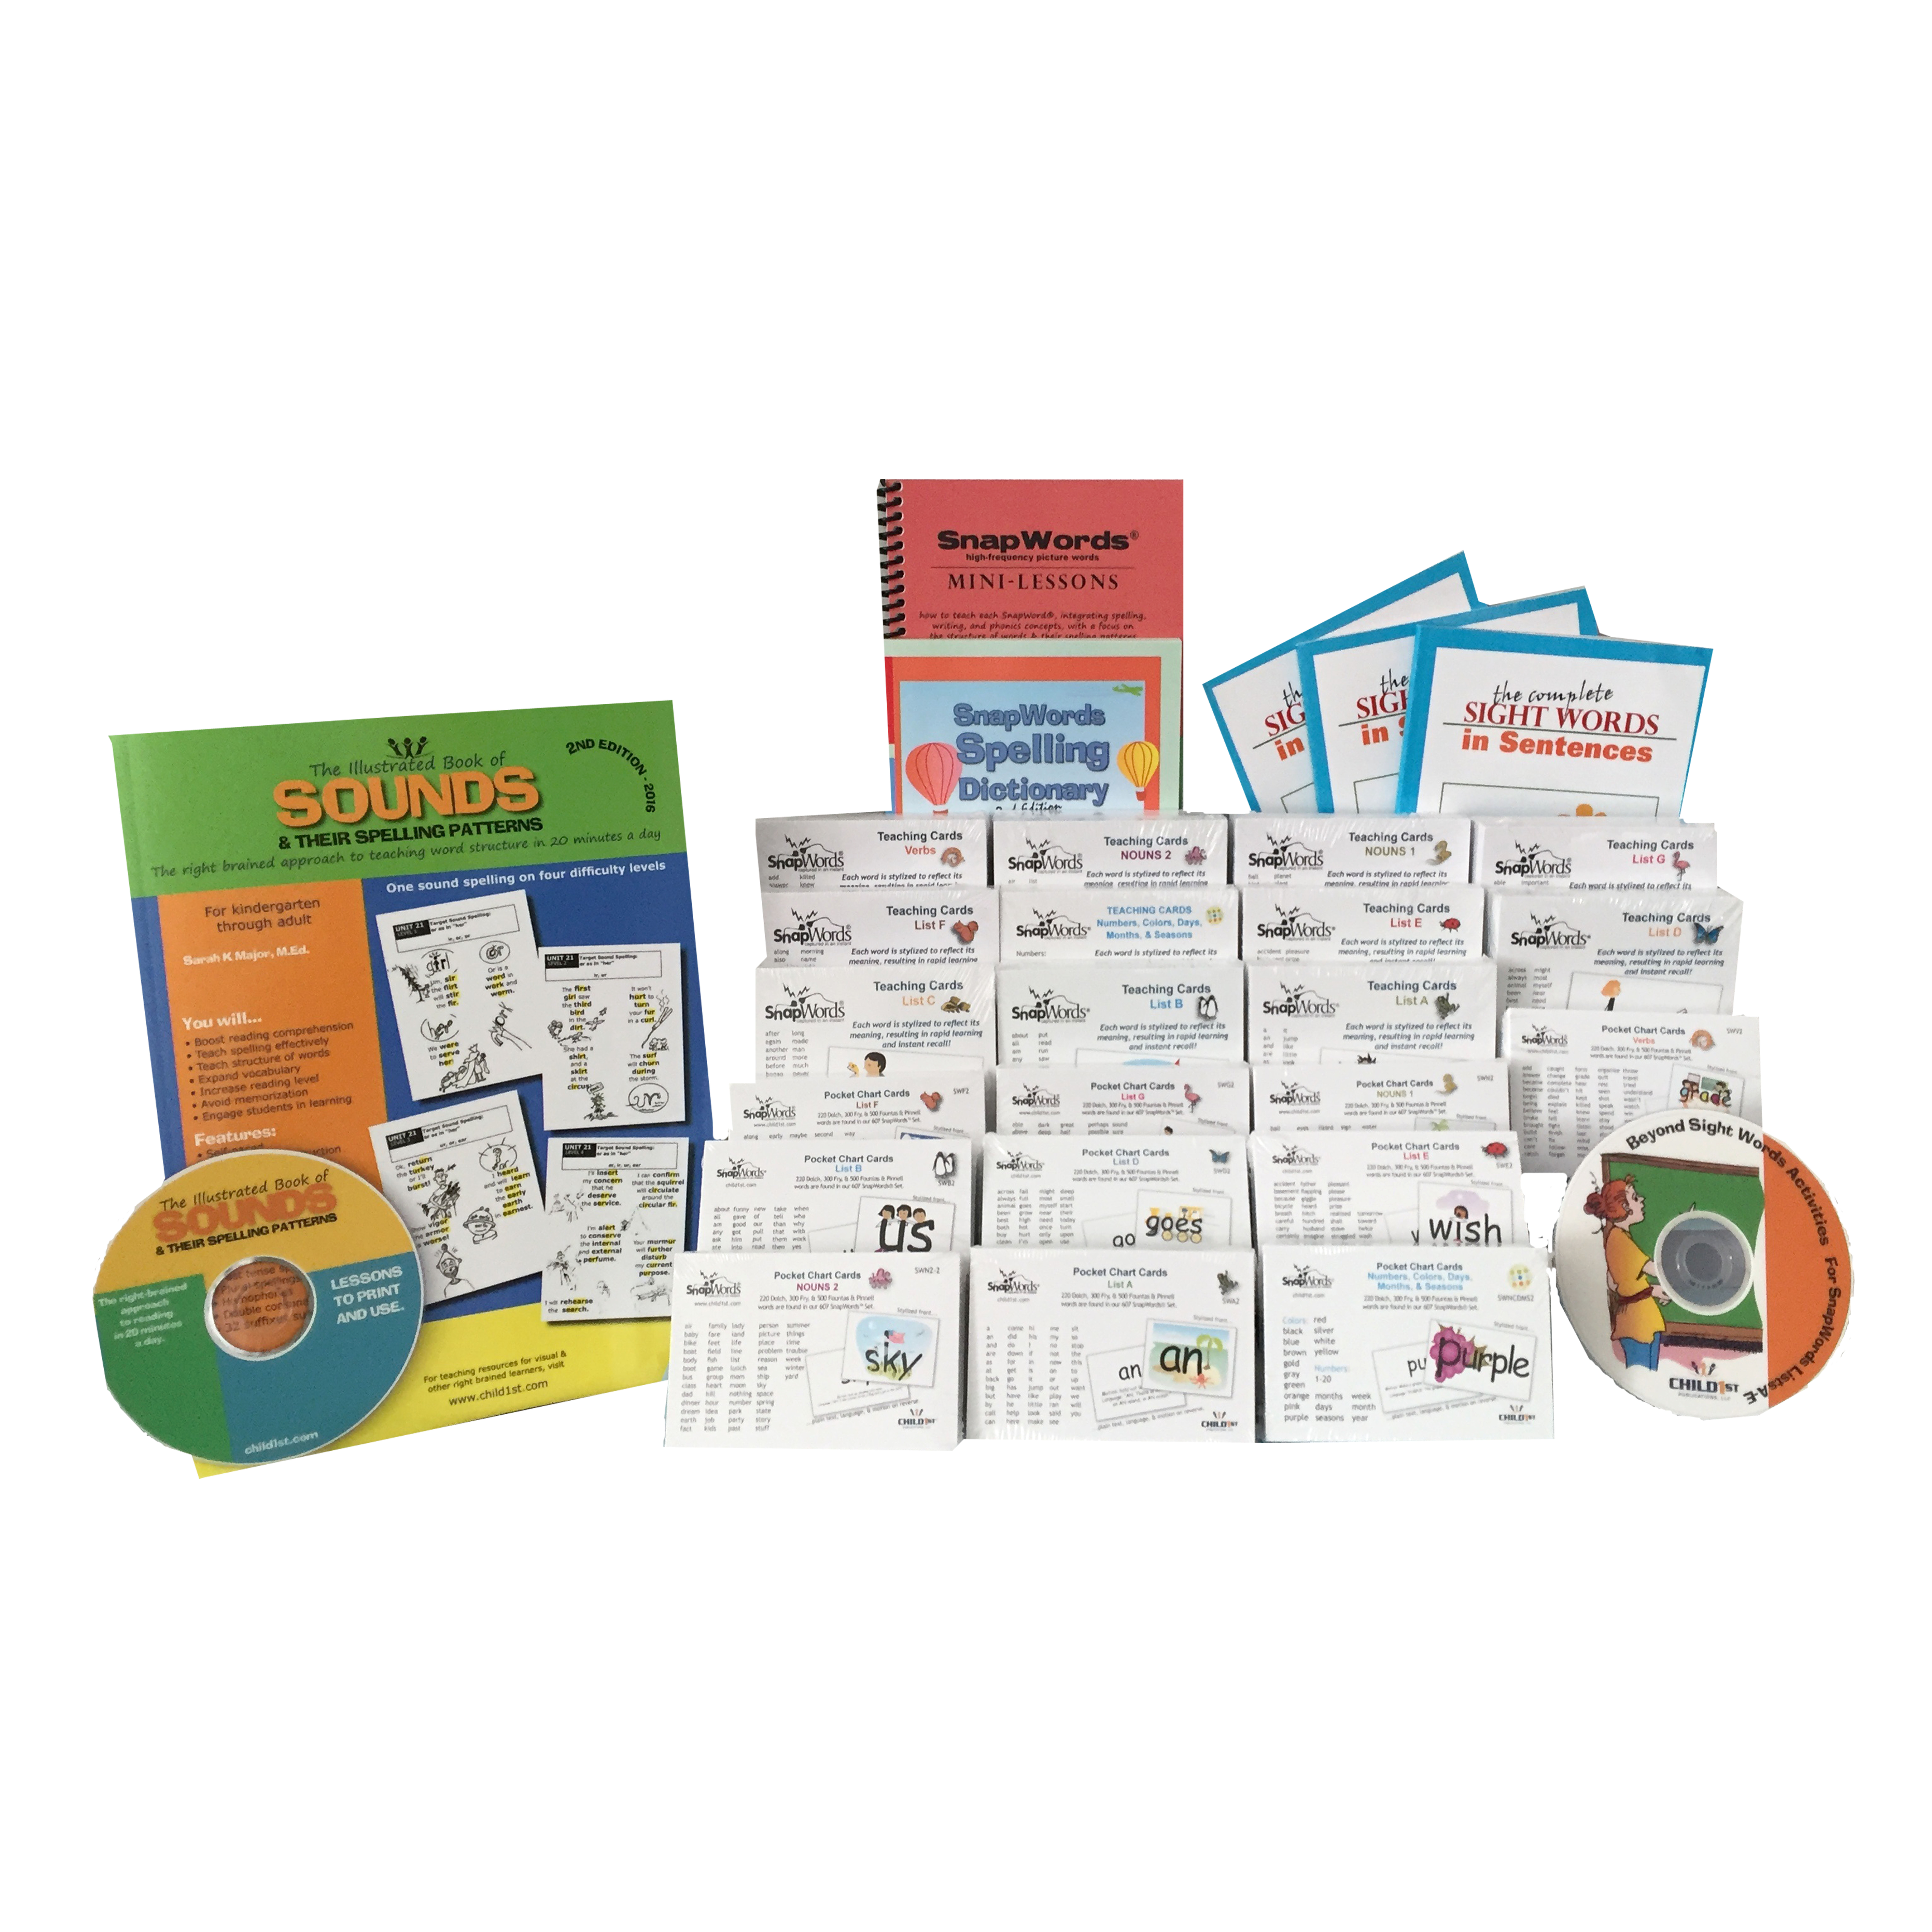 SnapWords ClassroomKit helps RightBrained Learners by Kulics Sales & Marketing